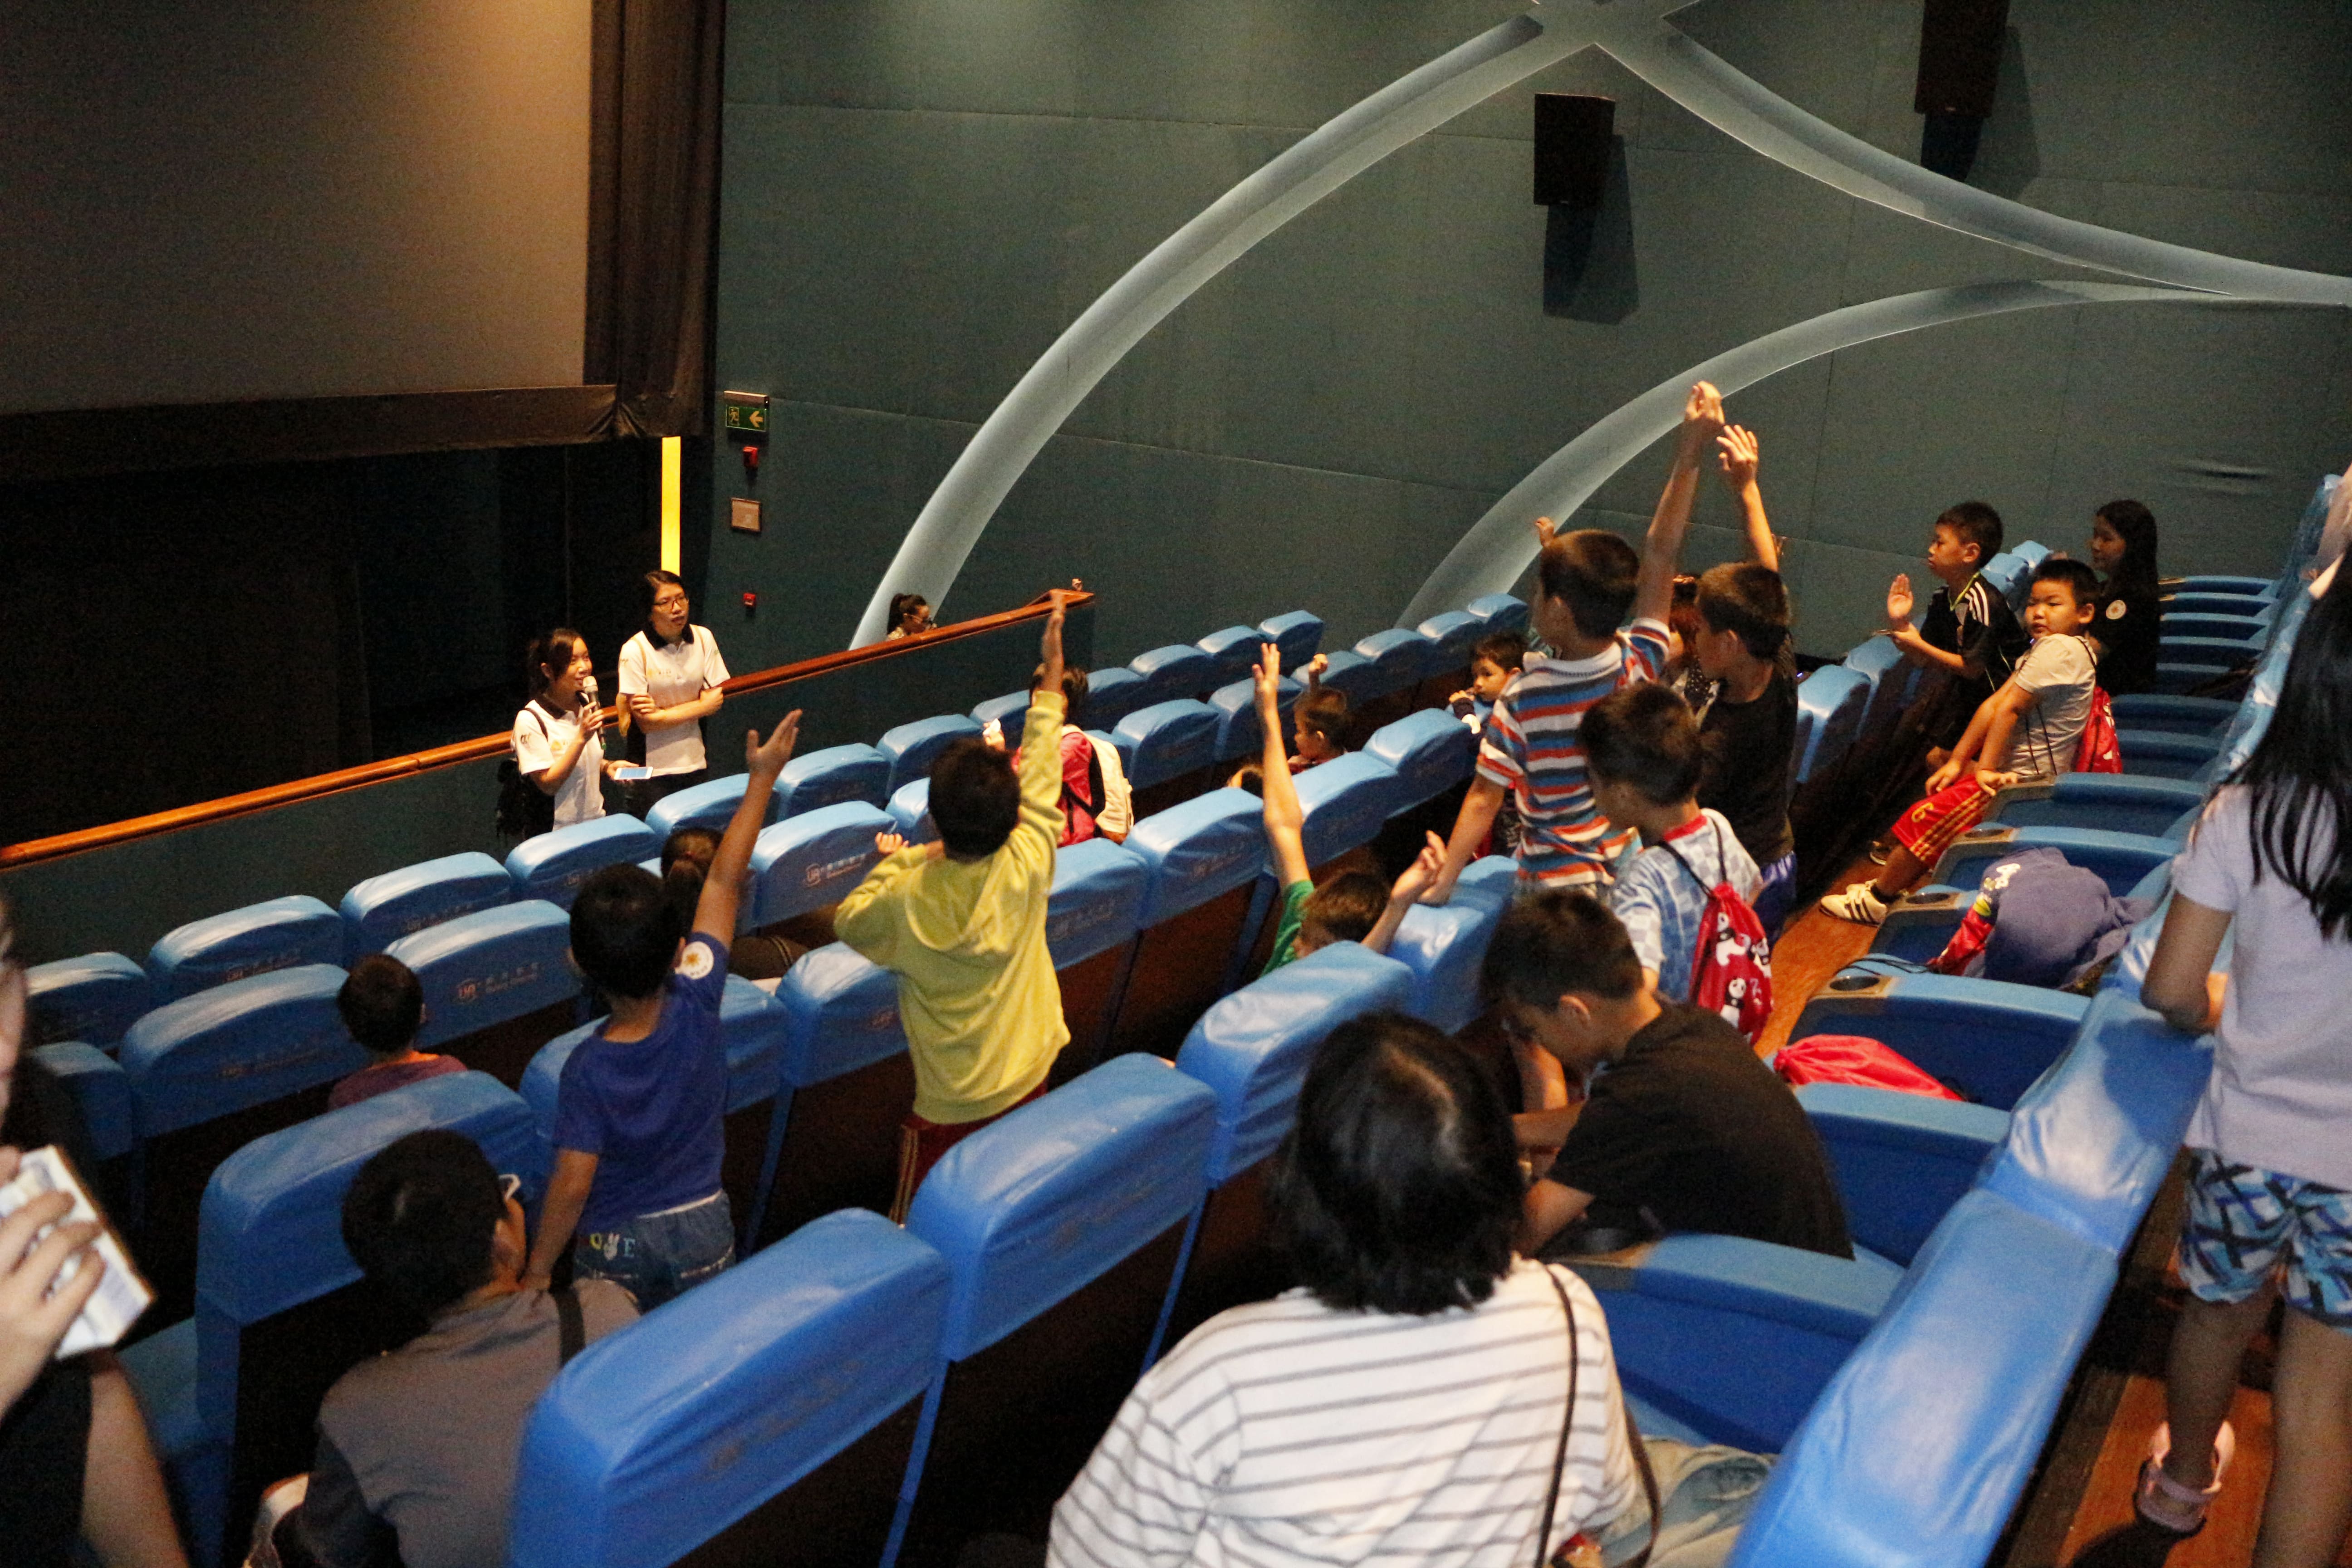 CESL Asia’s Kids Movie Day Ignited the Summer for the Less Advantaged Children